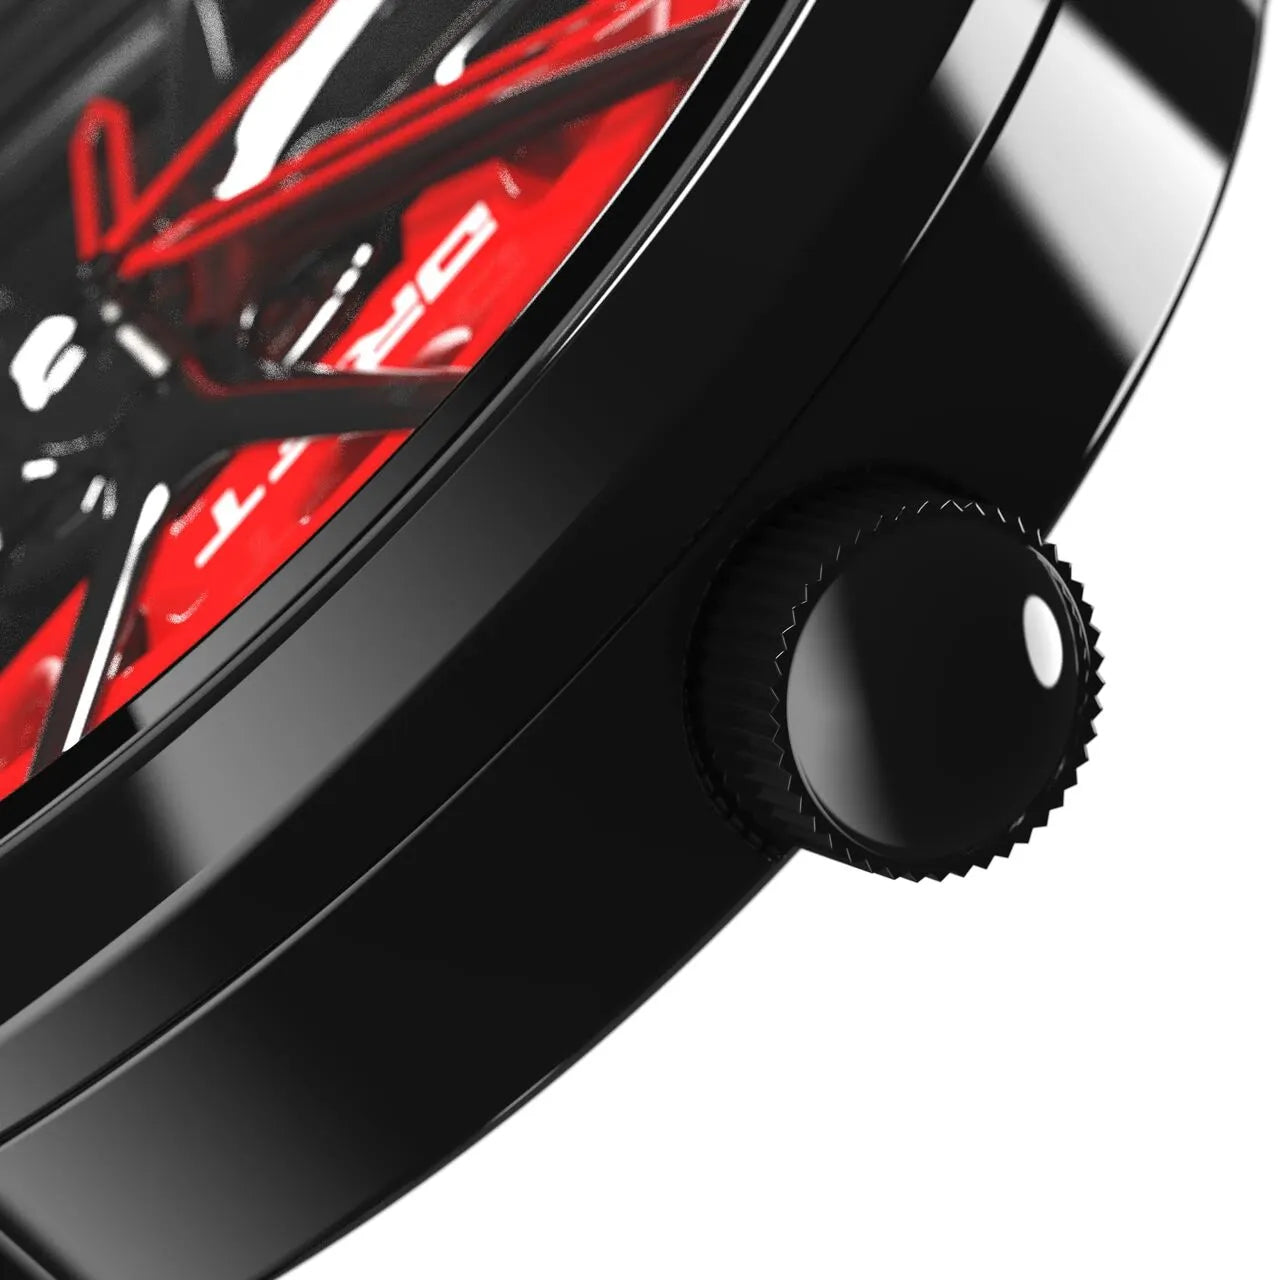 Fuel your fashion with our vibrant red Nitro Rim Watch! Engineered by a German startup, these precision watches are tailored for motorsport, tuning, and auto aficionados. Get set to ignite your passion! #id_46744364253514